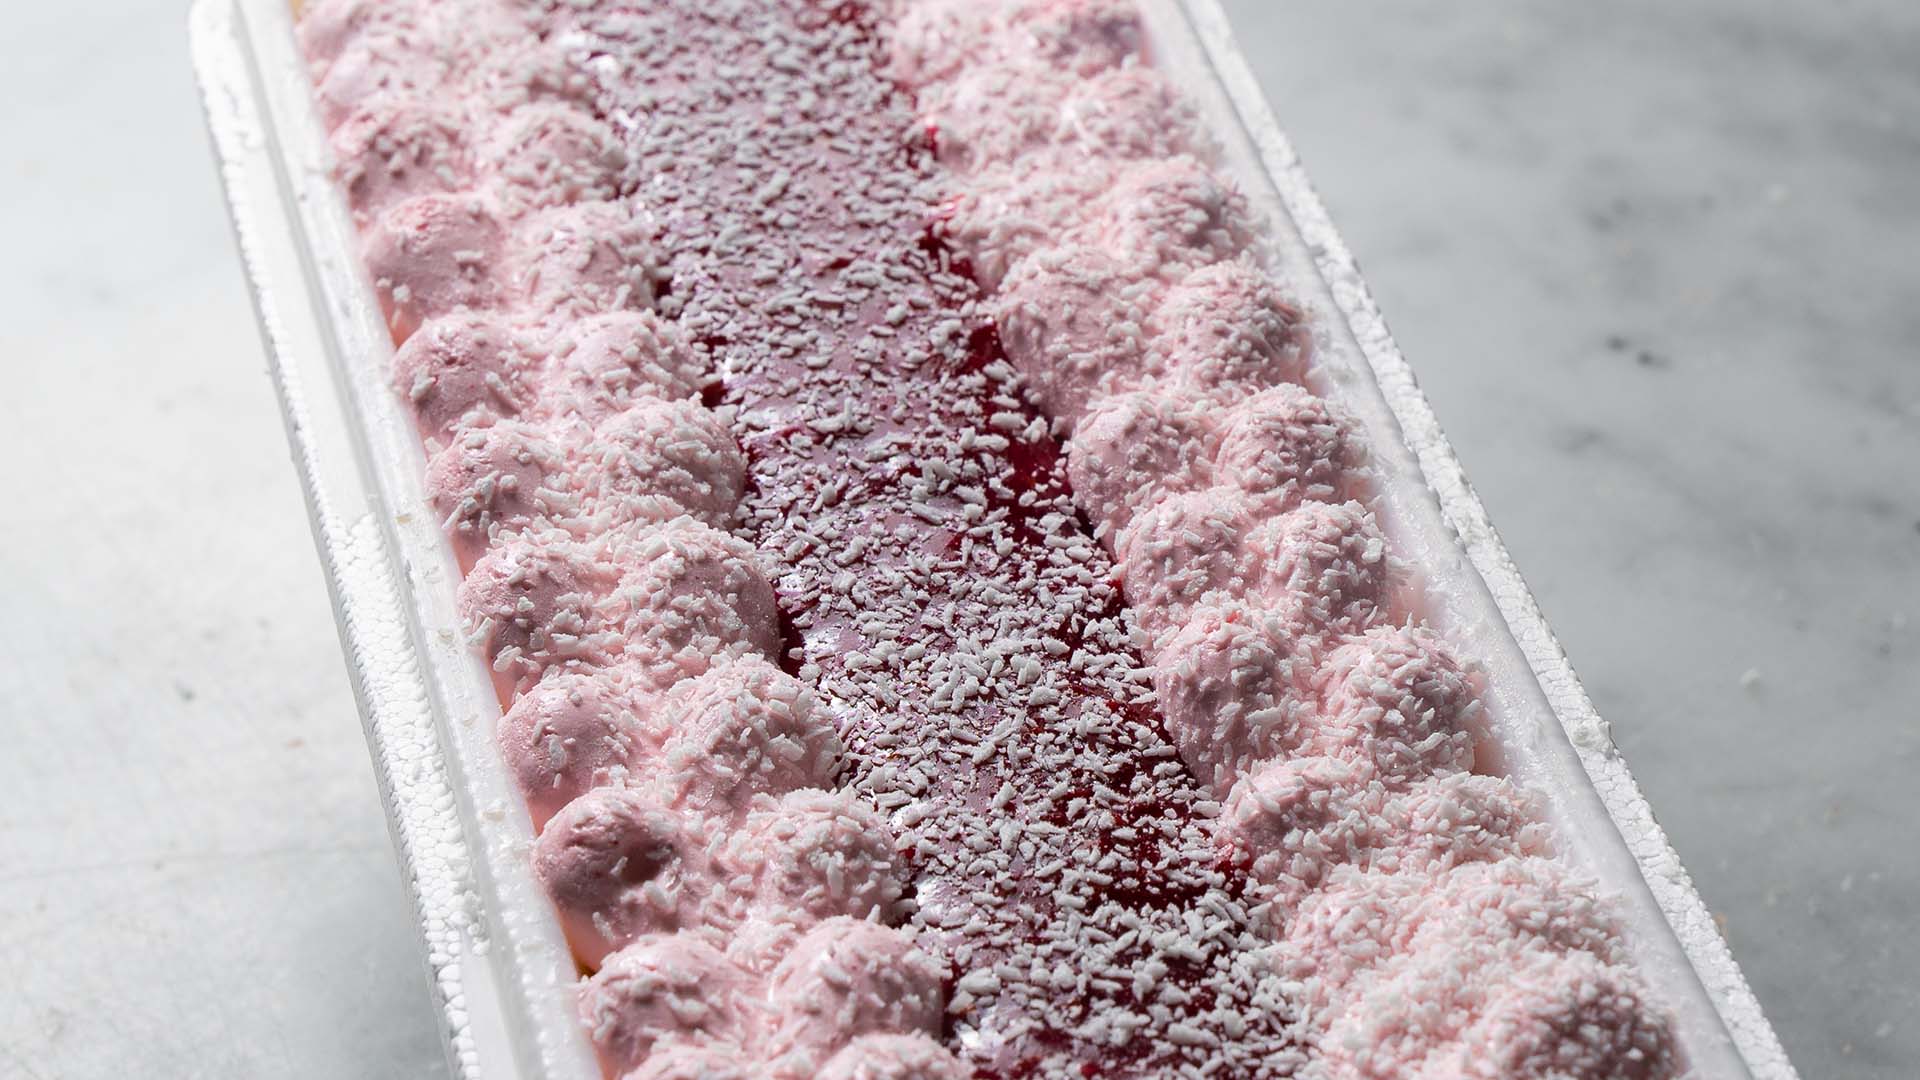 Iced VoVo Gelato Is the Indulgent Messina Flavour You Can Now Order by the Tub